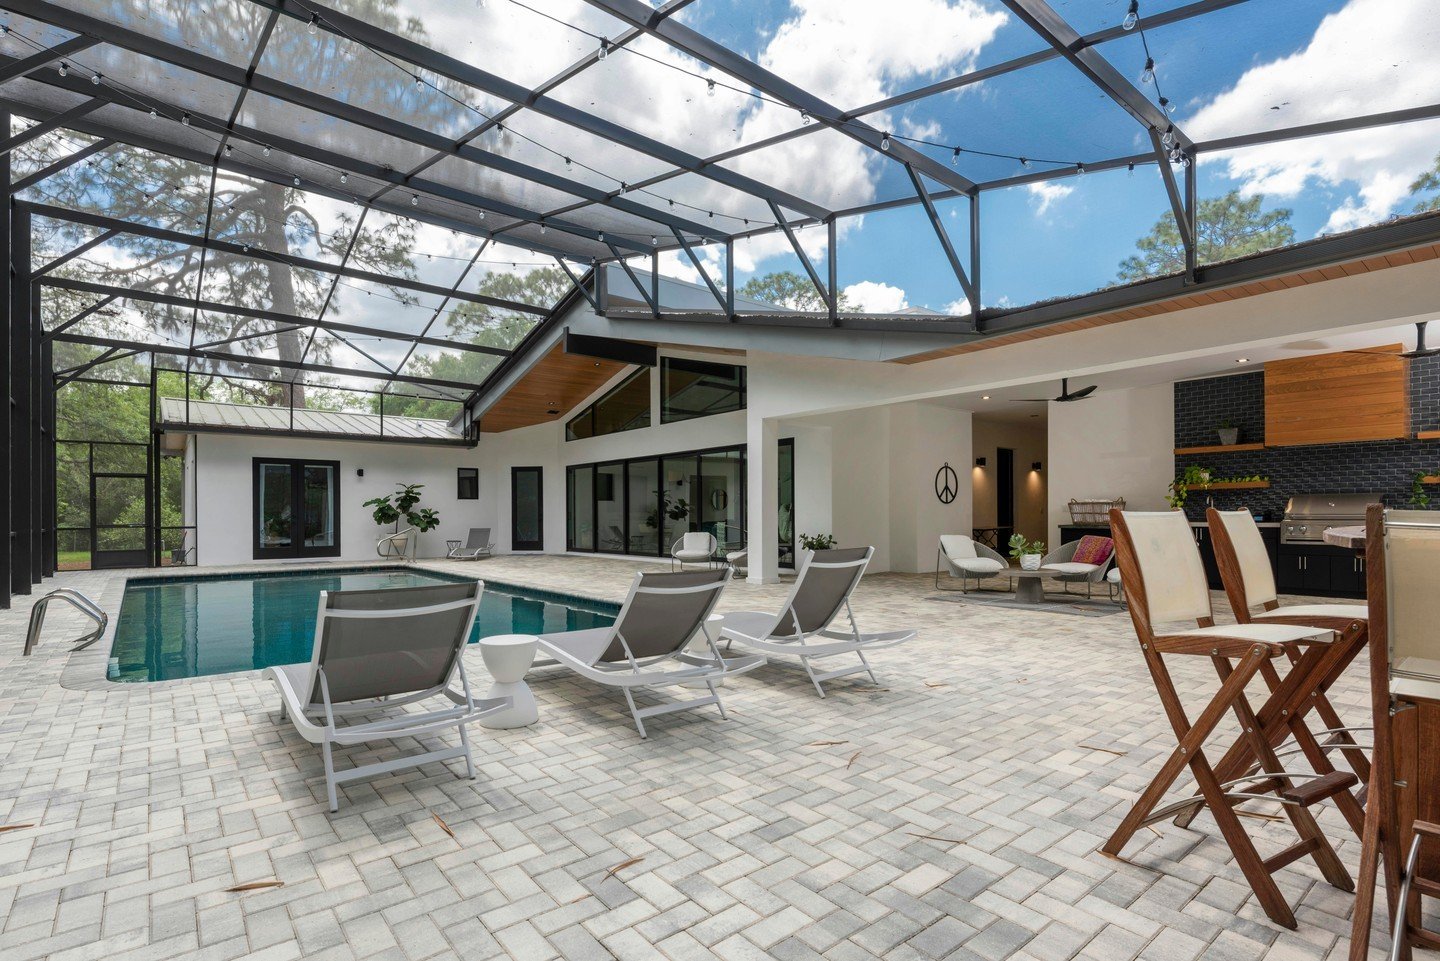 Summer dreams come true! ☀️ This indoor-outdoor oasis is the perfect spot to soak up the sun and unwind. 

We blurred the lines between indoors and out, creating a seamless flow from the inviting pool area with luxurious lounging spots to the convers